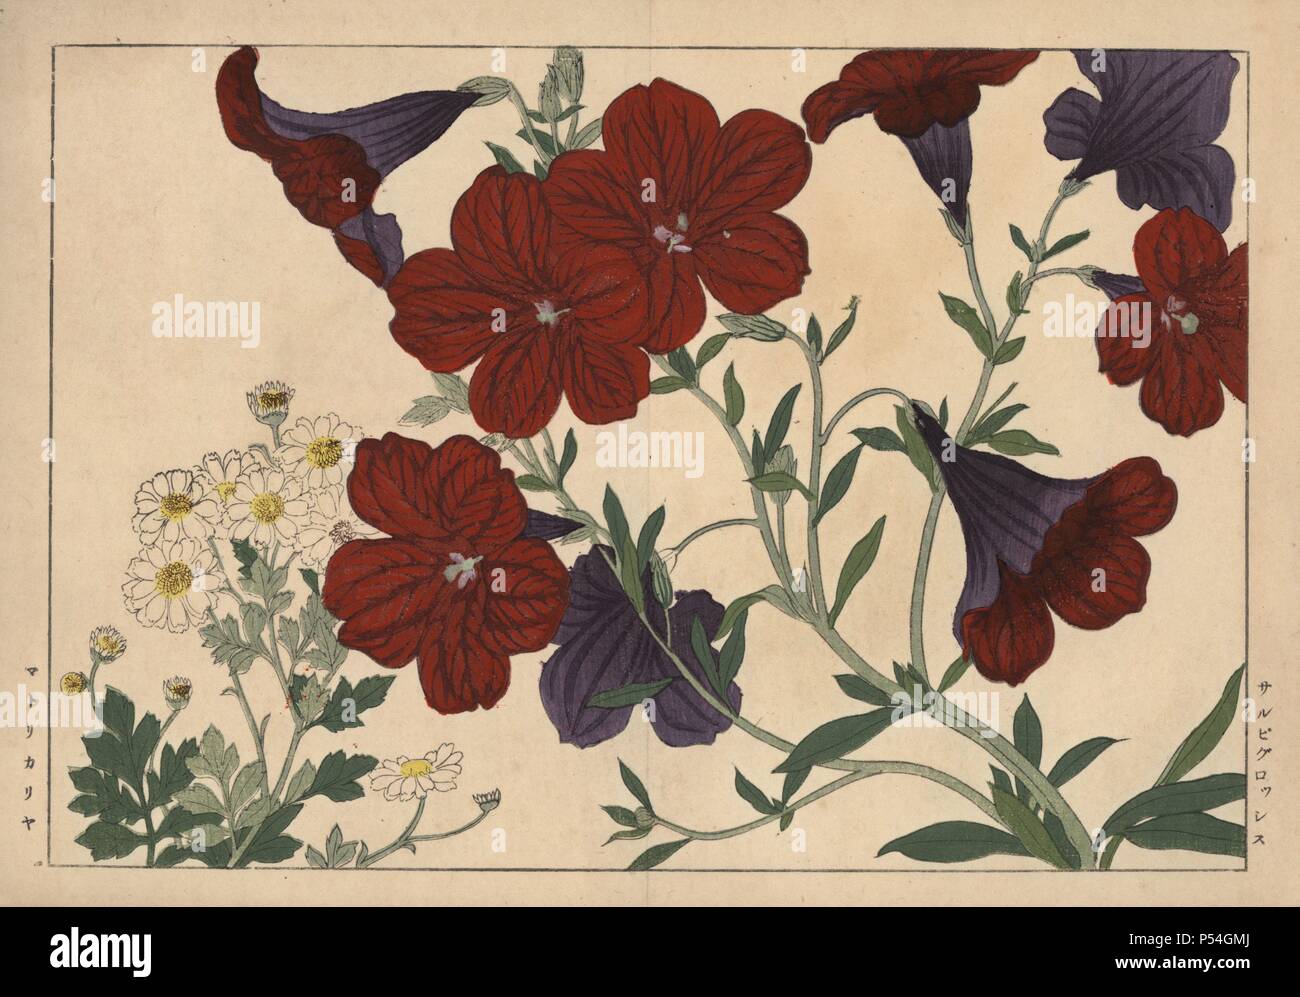 Painted tongue or velvet trumpet flower, Salpiglossis sinuata, and mayweed or wild chamomile, Matricaria recutita. Handcoloured woodblock print from Konan Tanigami's 'Seiyou Sokazufu' (Pictorial Album of Western Plants and Flowers: Summer), Unsodo, Kyoto, 1917. Tanigami (1879-1928) depicted 125 varieties of garden plants through the four seasons. Stock Photo